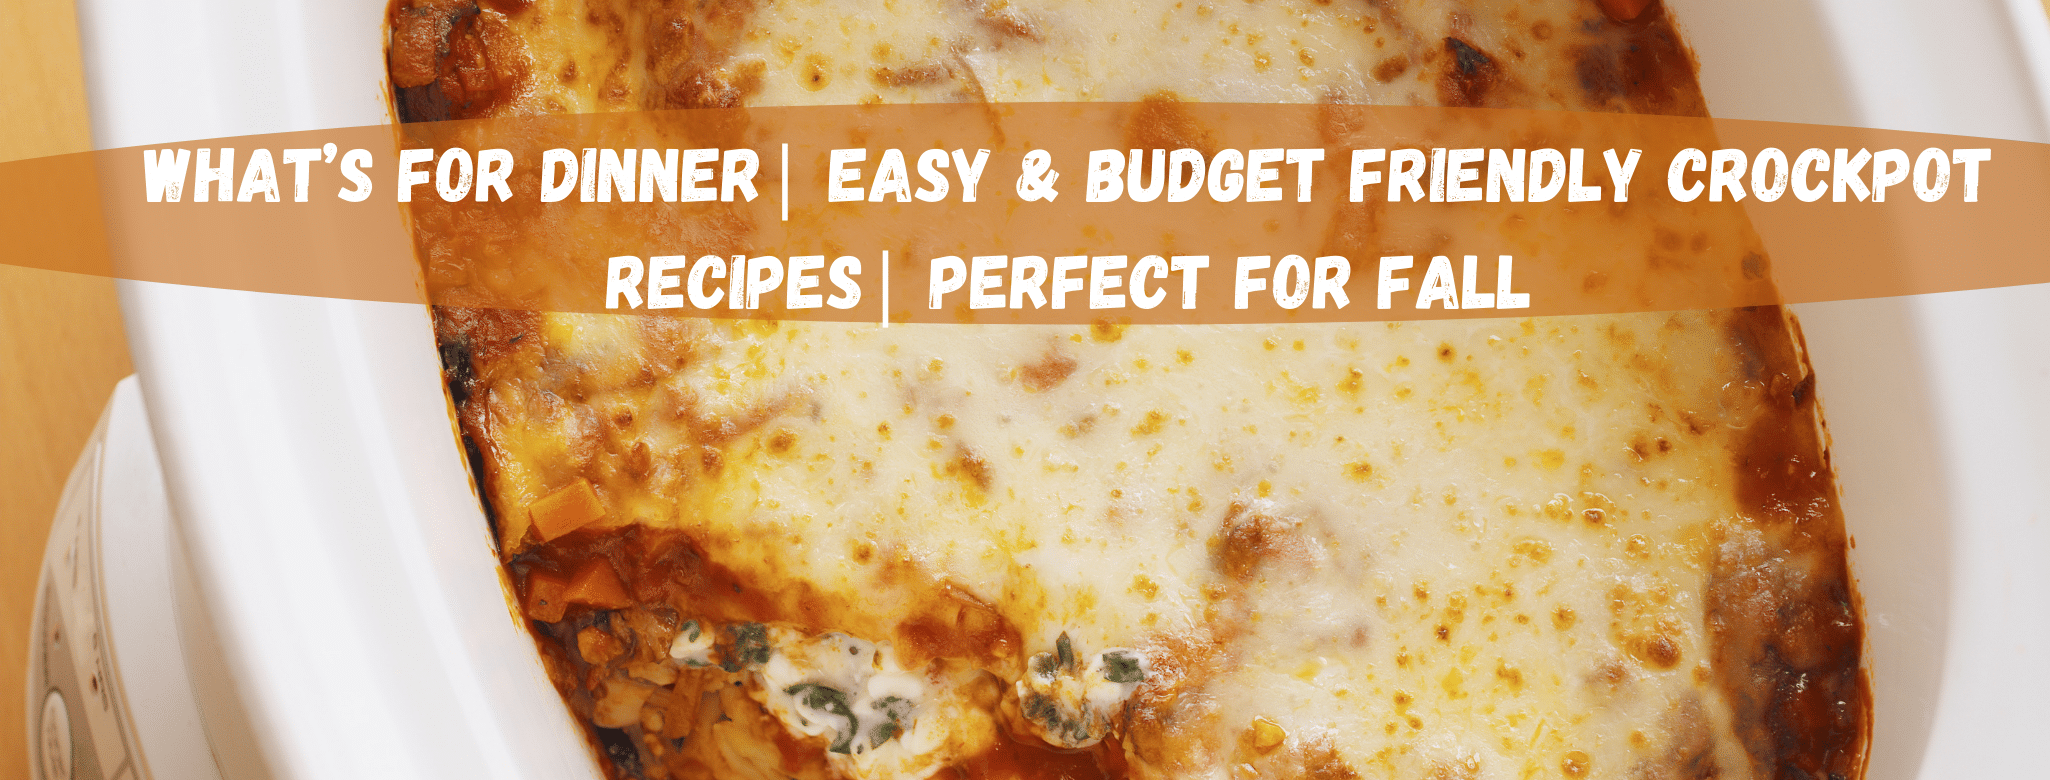 What’s for Dinner| Easy & Budget Friendly Crockpot Recipes| Perfect for Fall